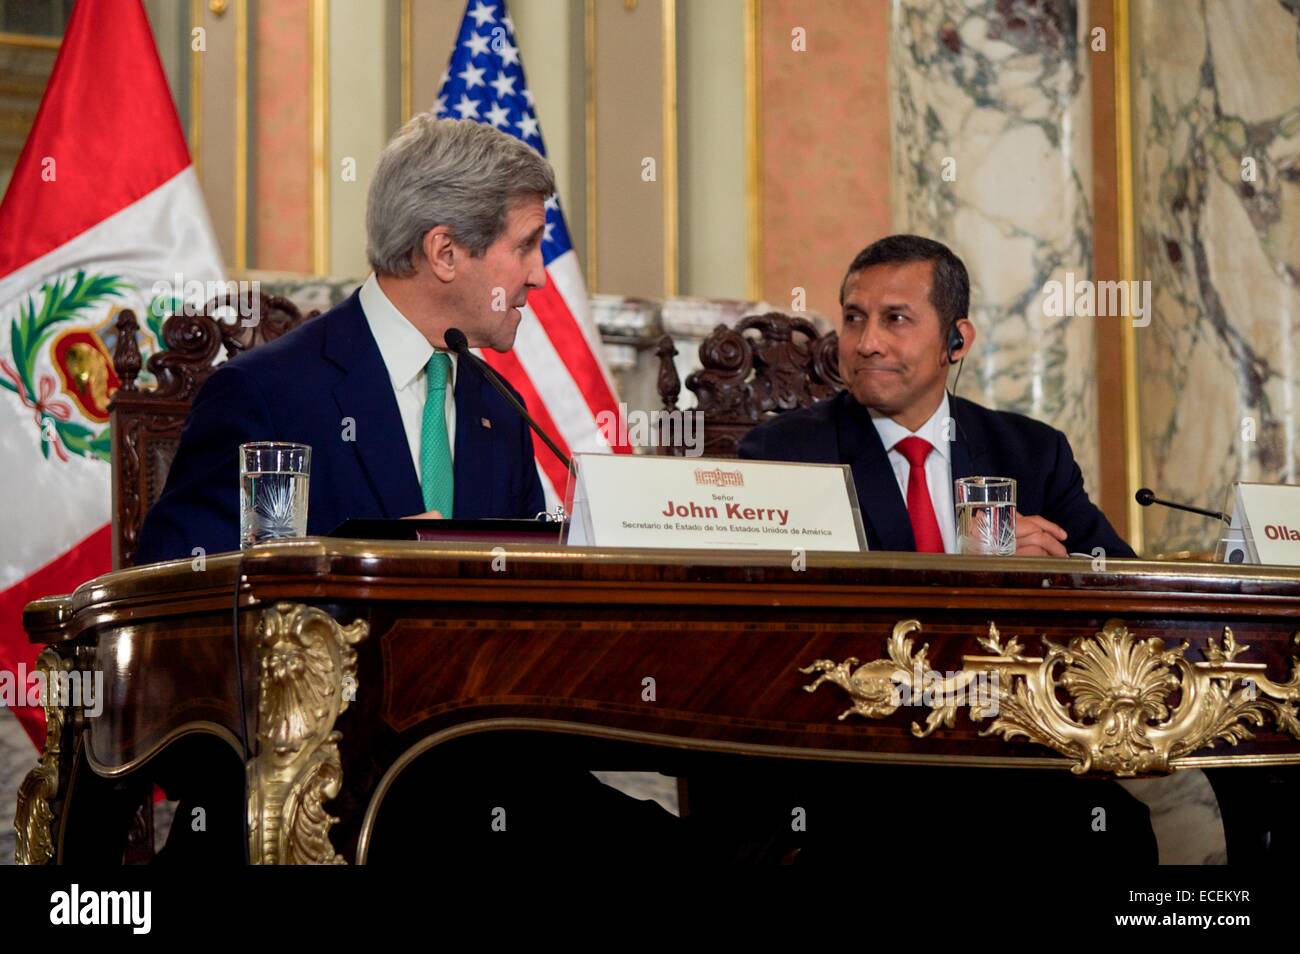 US Secretary of State John Kerry and Peruvian President Ollanta Humala Tasso speak during a joint press conference December 11, 2014 in Lima, Peru. Stock Photo